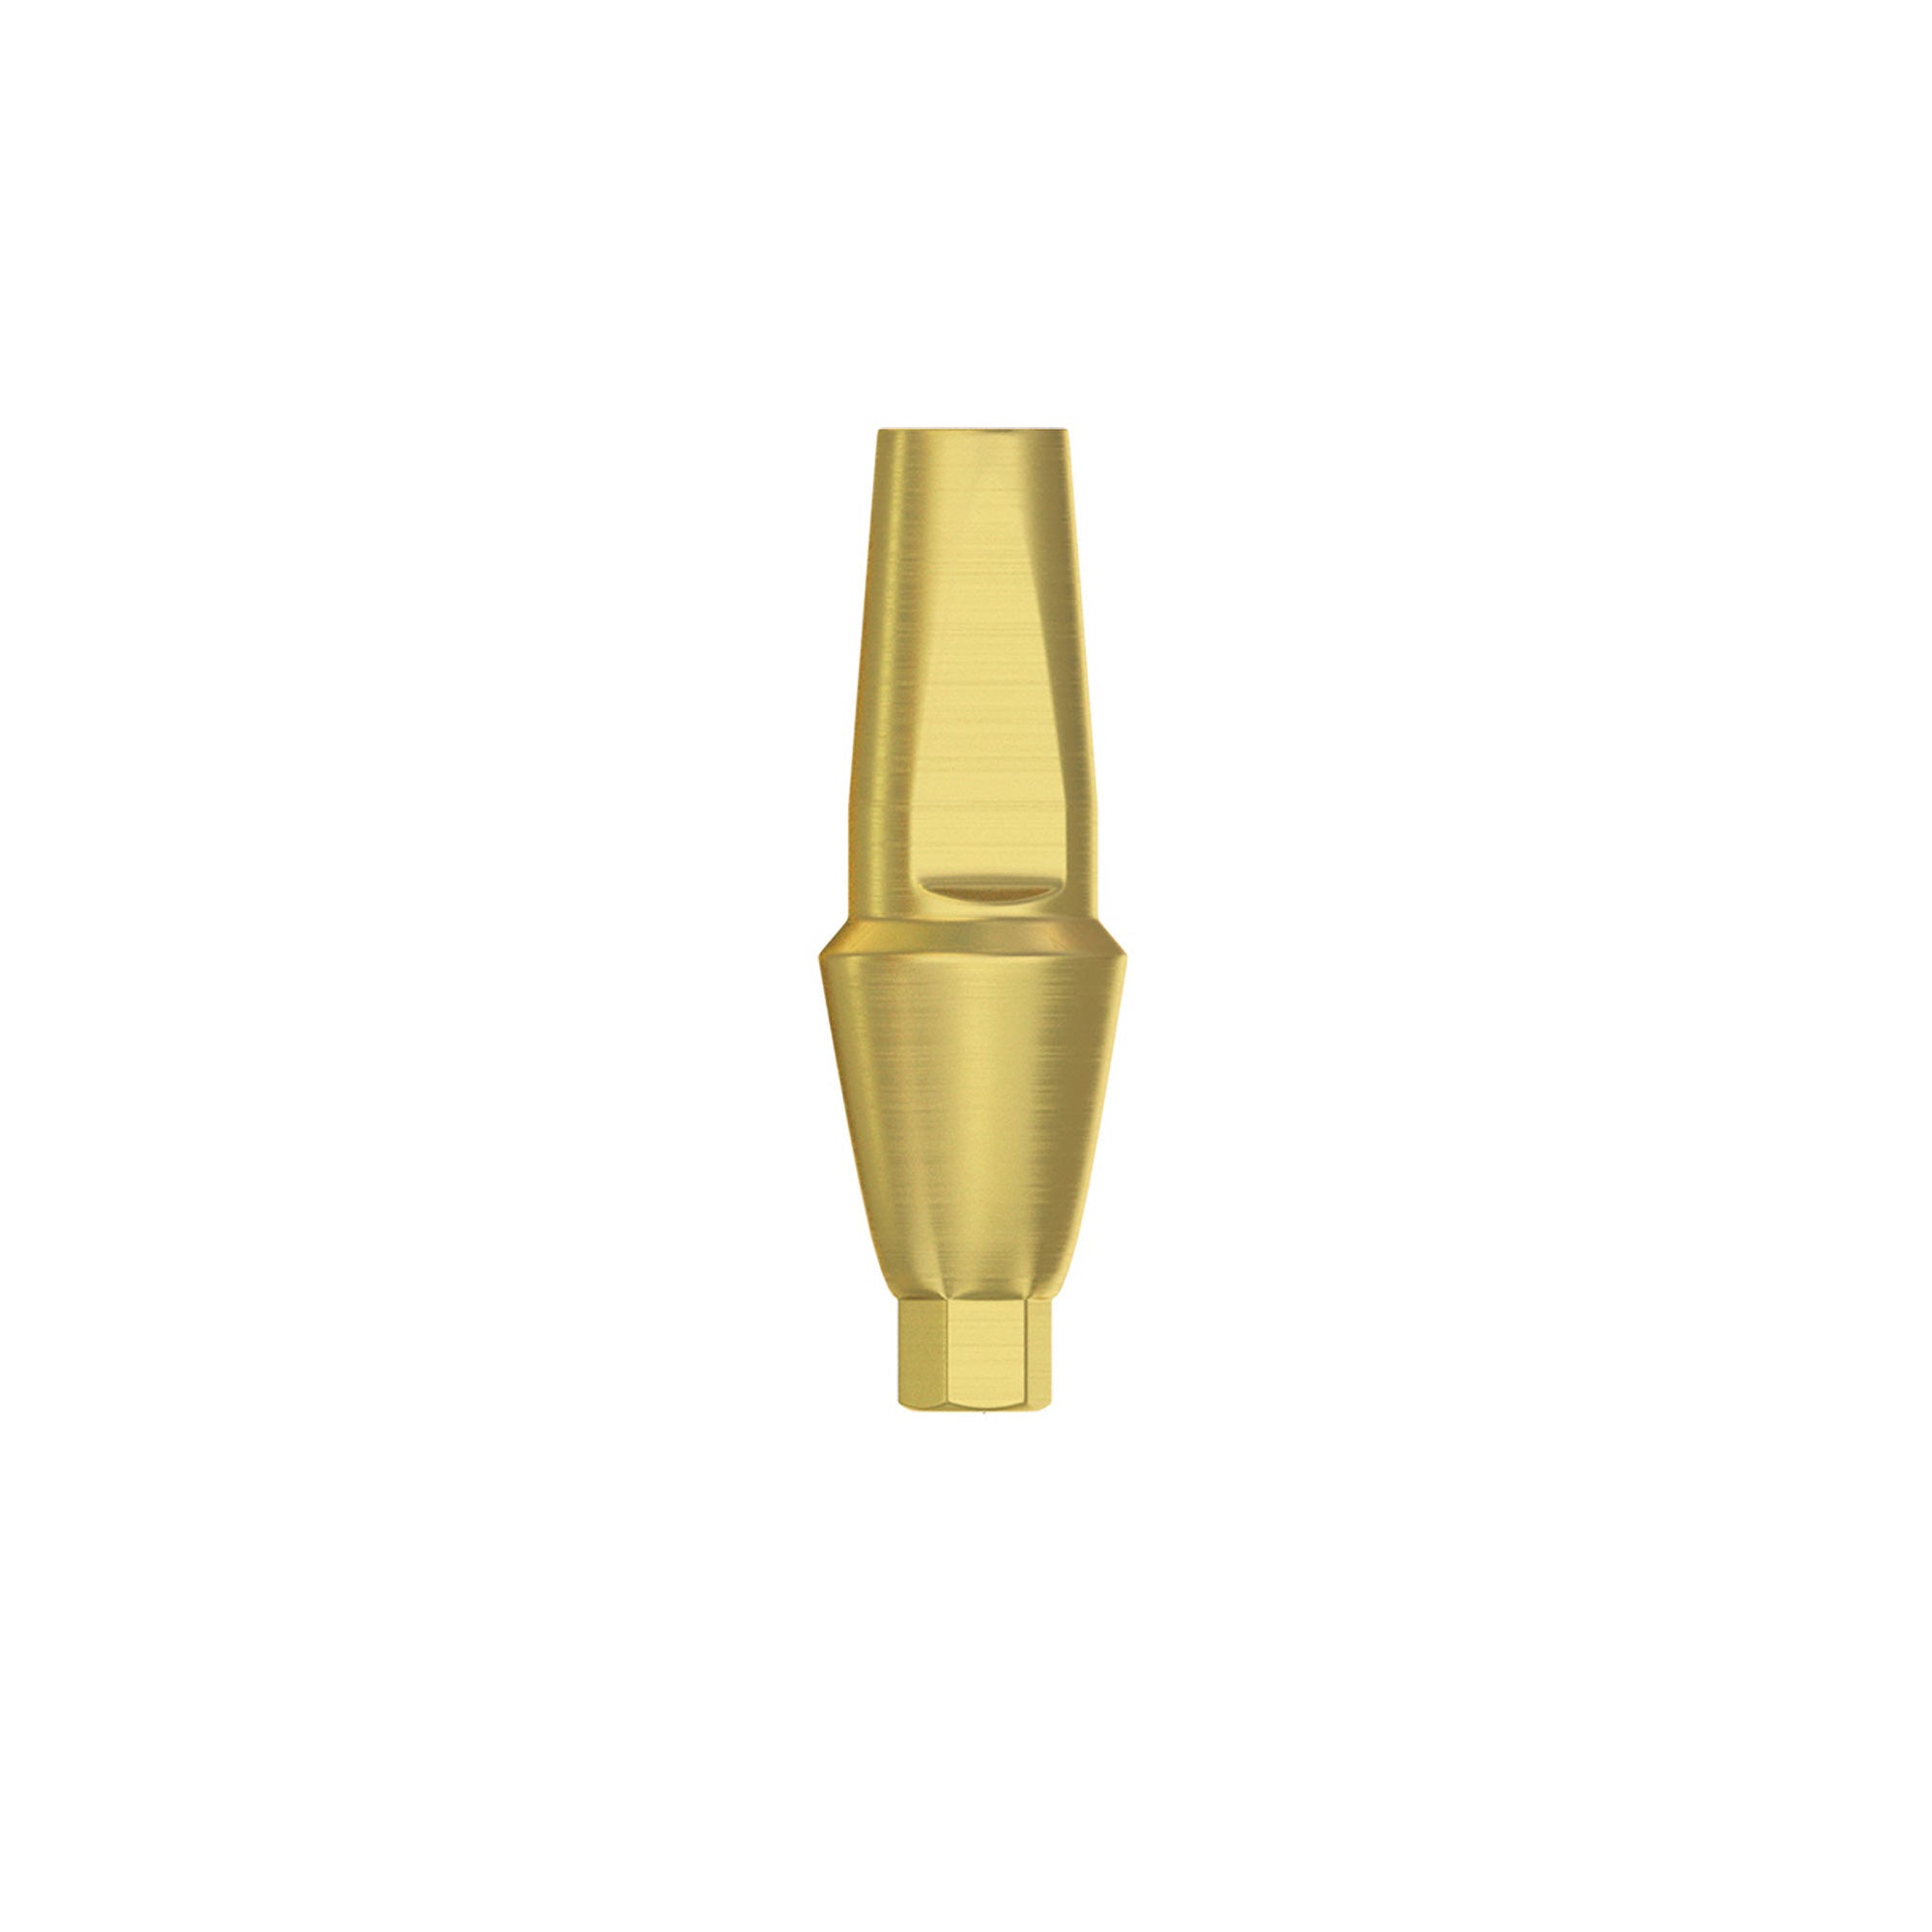 DSI Anatomic Straight Abutment - Conical Connection NP Ø3.5mm